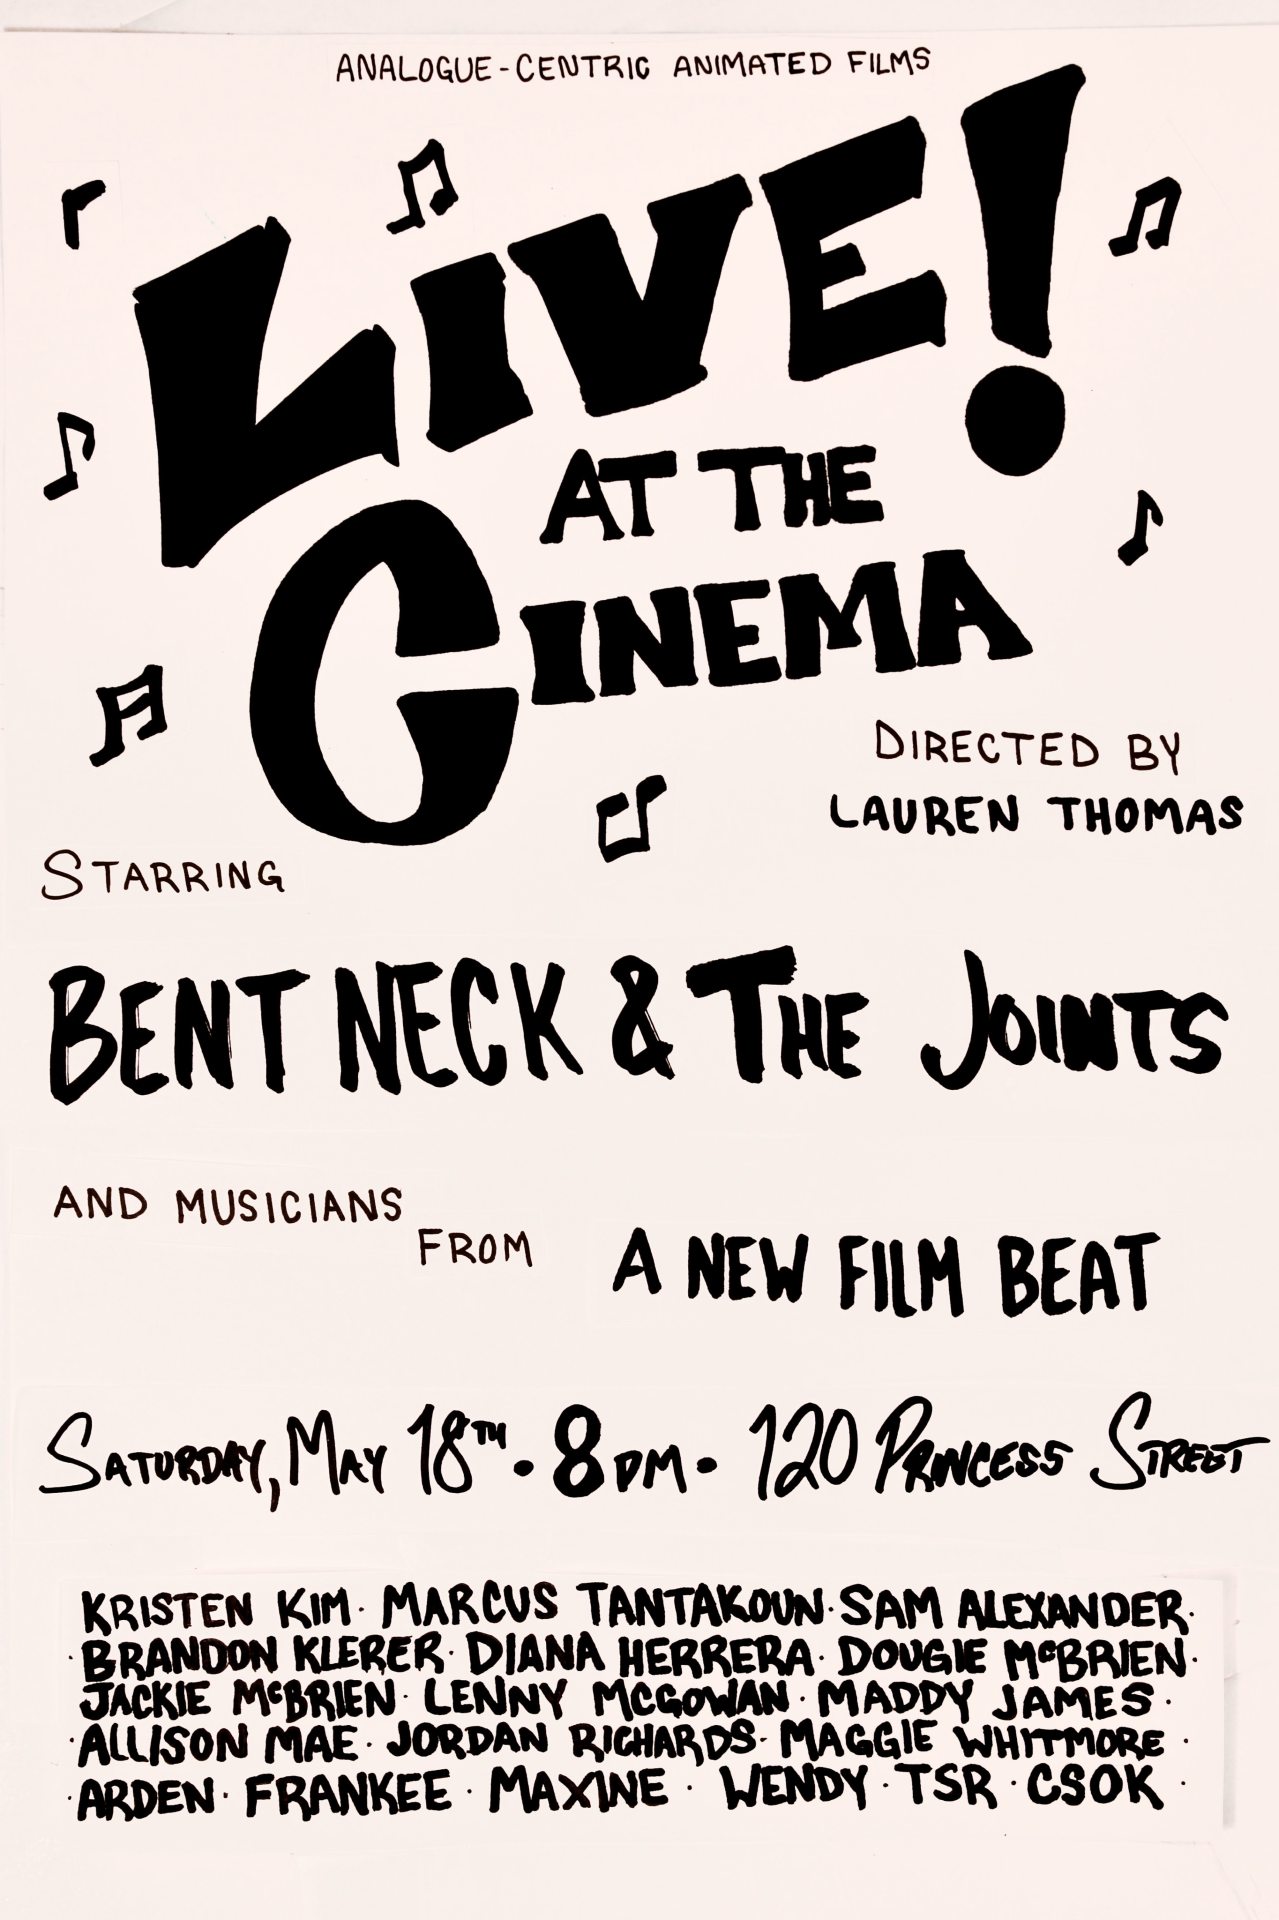 Poster of 'Live! At The Cinema'. The title, performers, director, date, time, and location are noted.